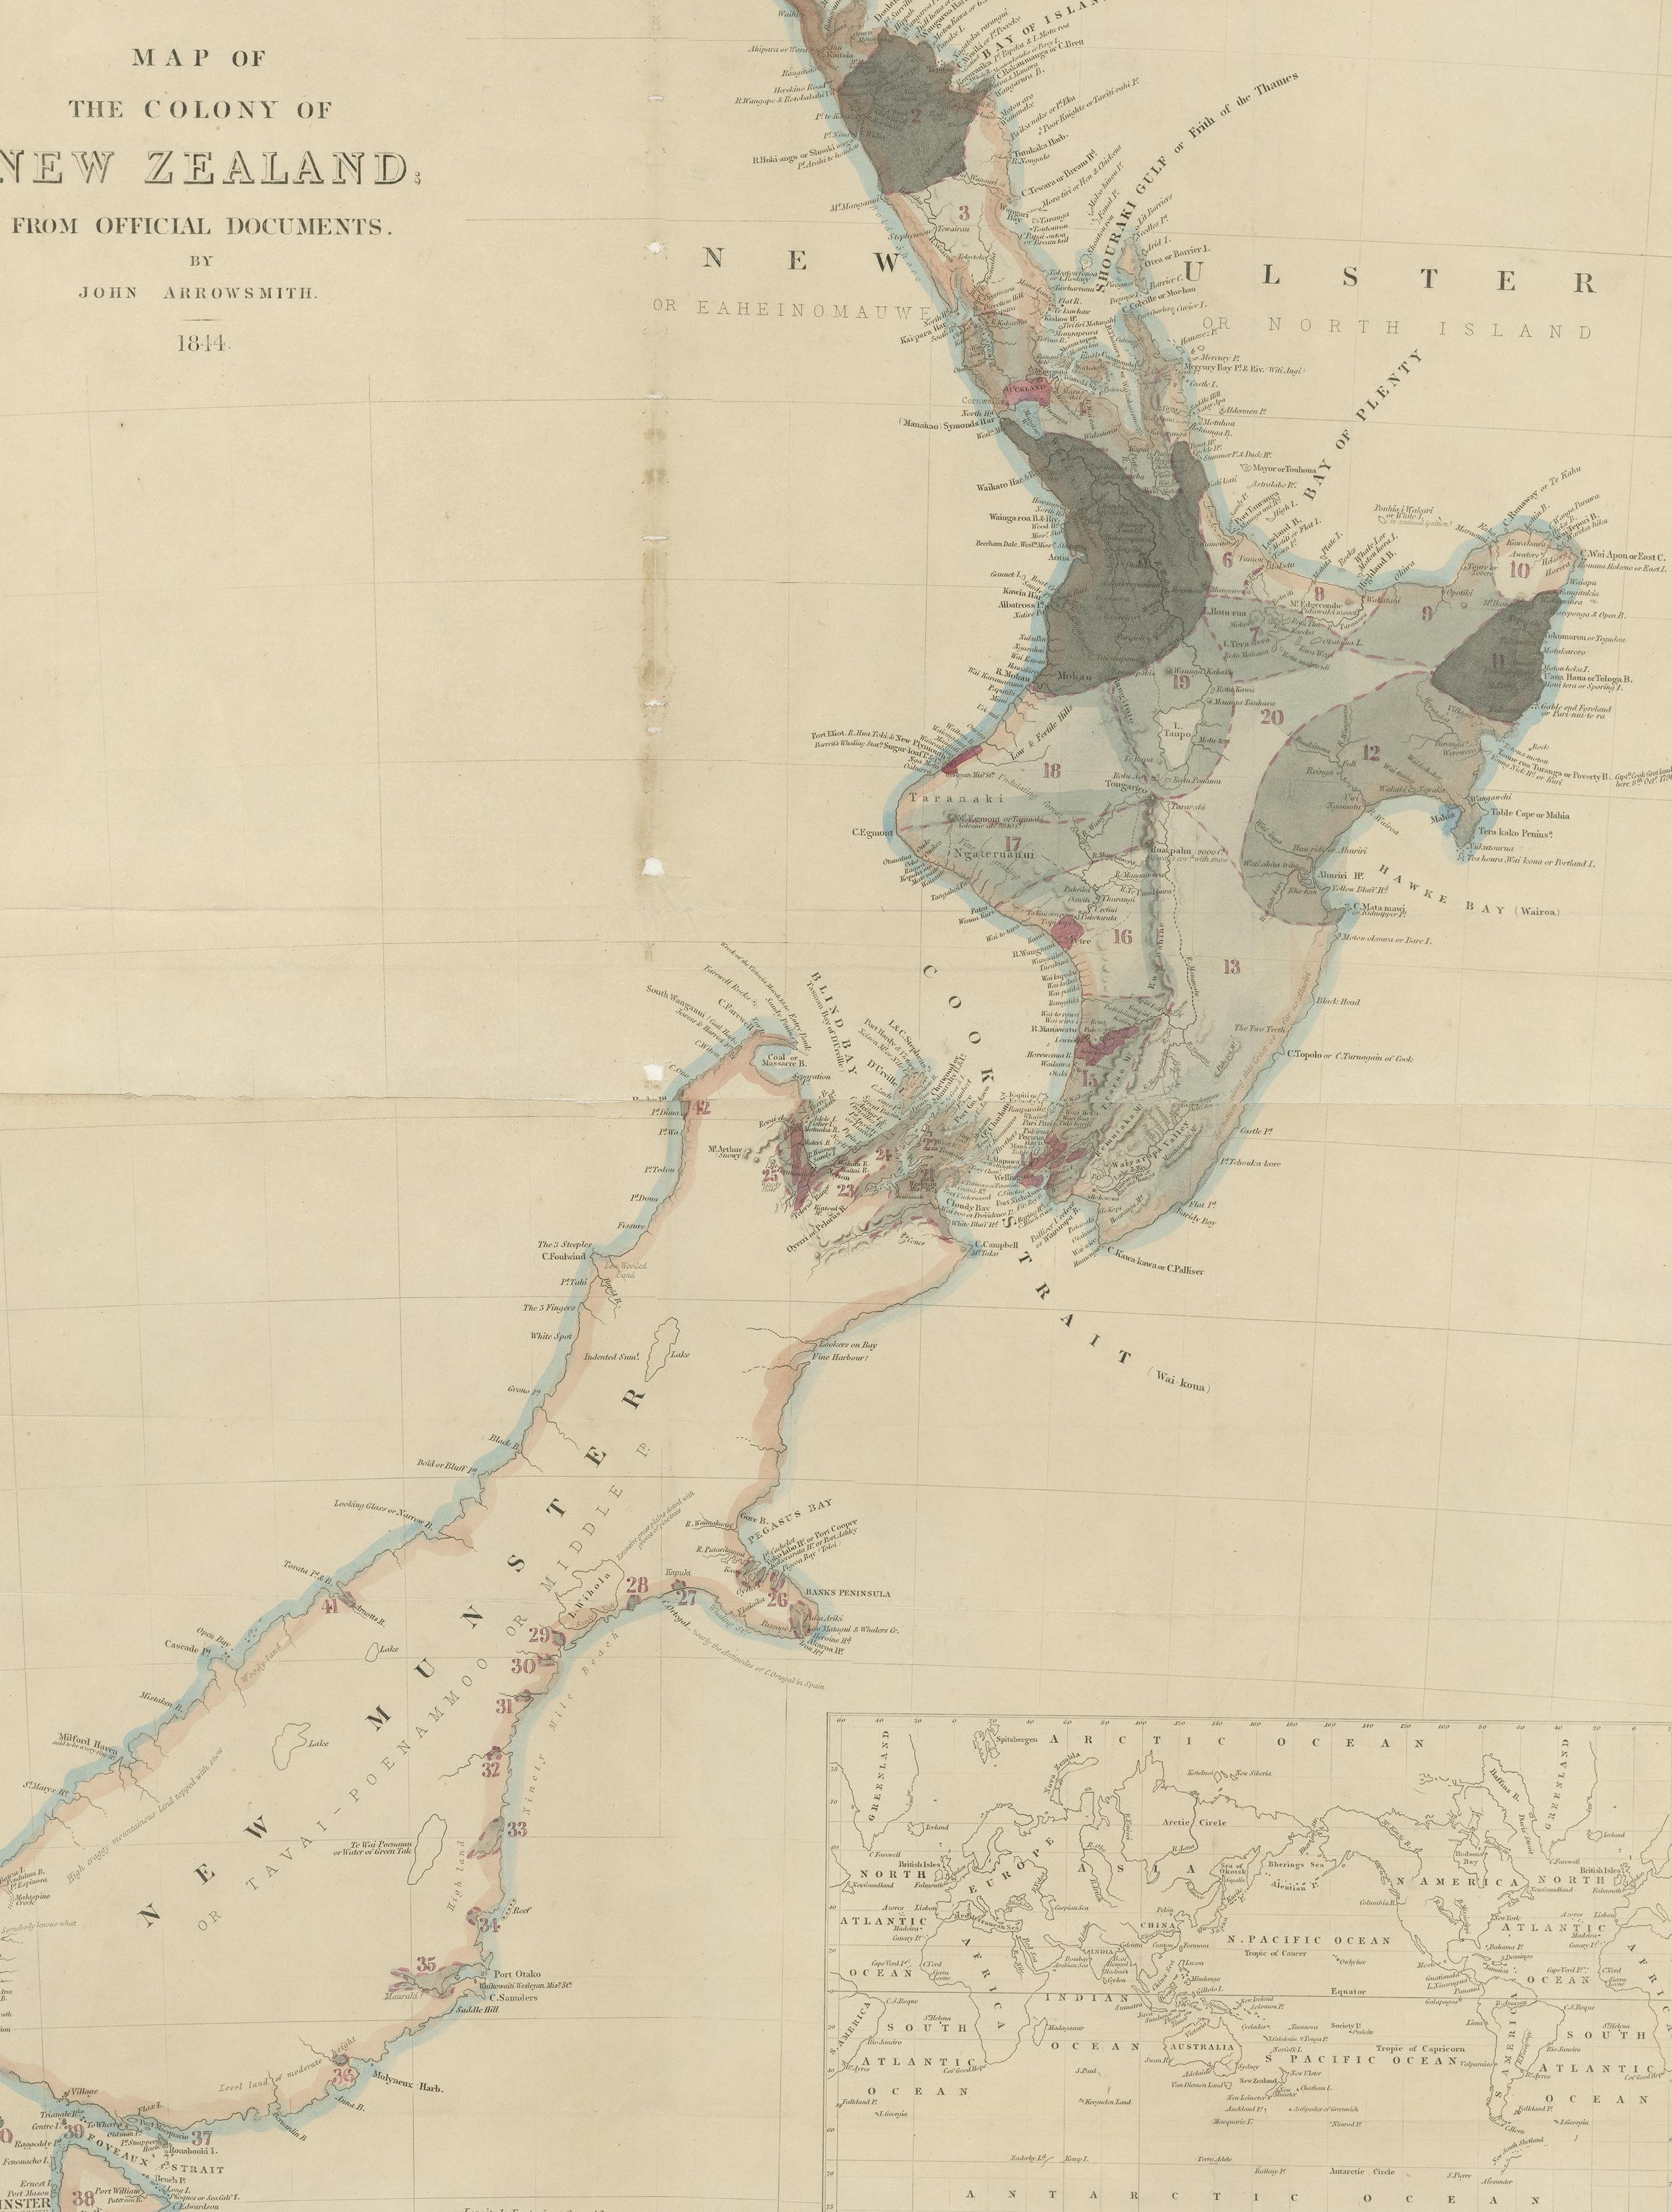 Antique map titled 'Map of the colony of New Zealand from official documents'. A scarce map of New Zealand. First issued in the 1830s, this state shows the progress in the exploration and development of New Zealand, but still pre-dates the addition